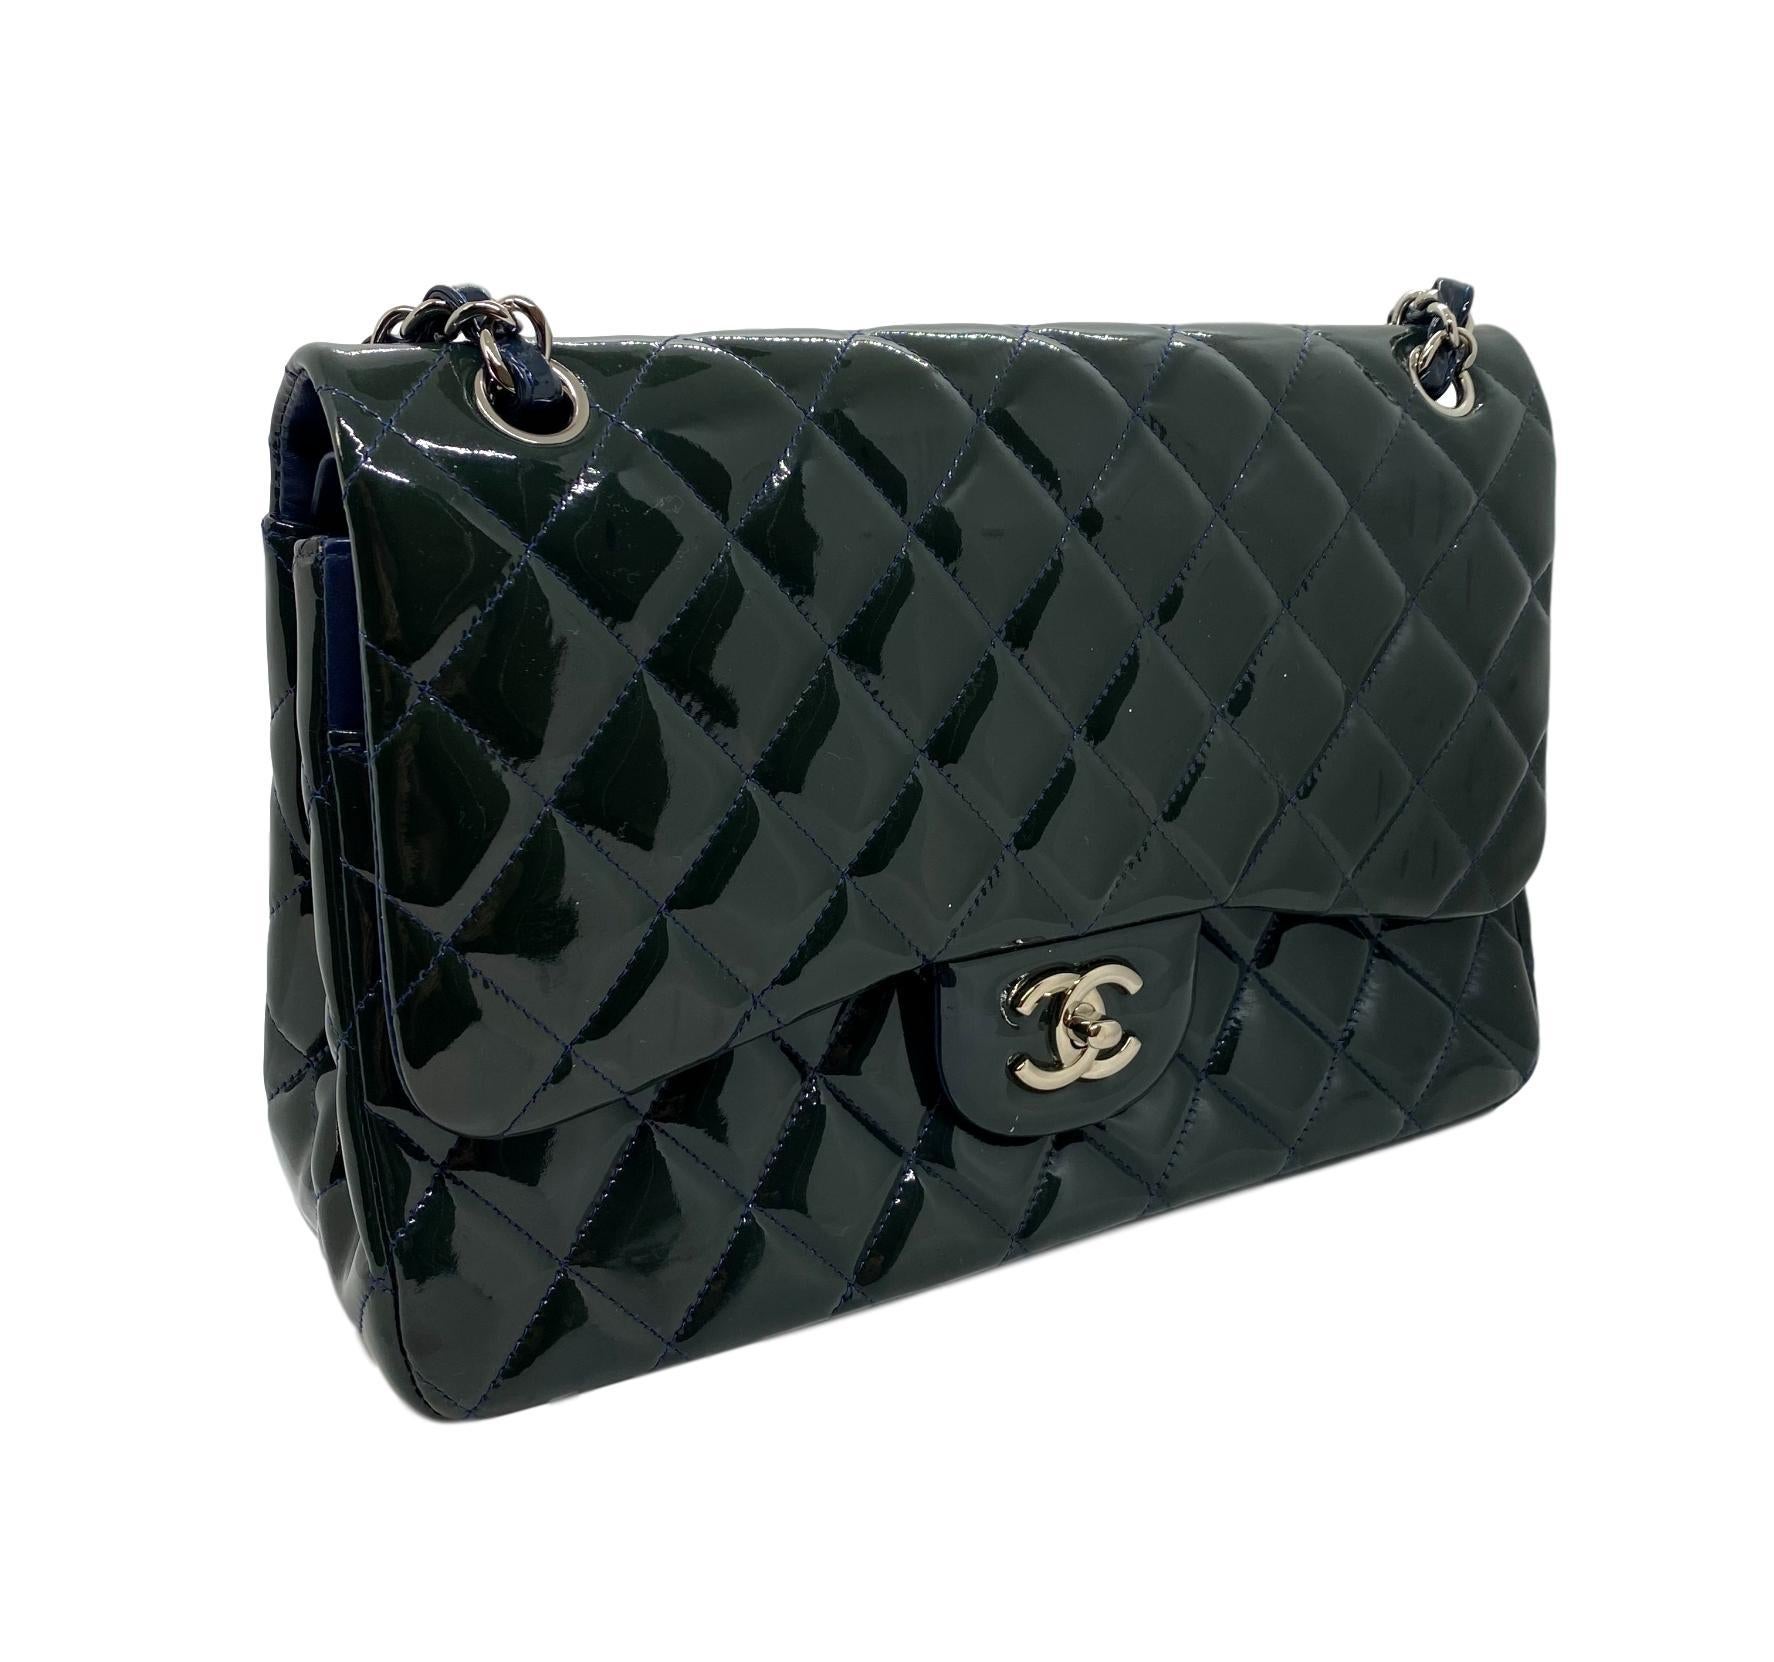 Chanel Deep Marine Patent Leather Jumbo Classic Double Flap Bag, 2010 - 2011. The iconic Chanel bag was originally issued by Coco Chanel in February 1955 which became the very first socially acceptable shoulder bag for the modern day woman of